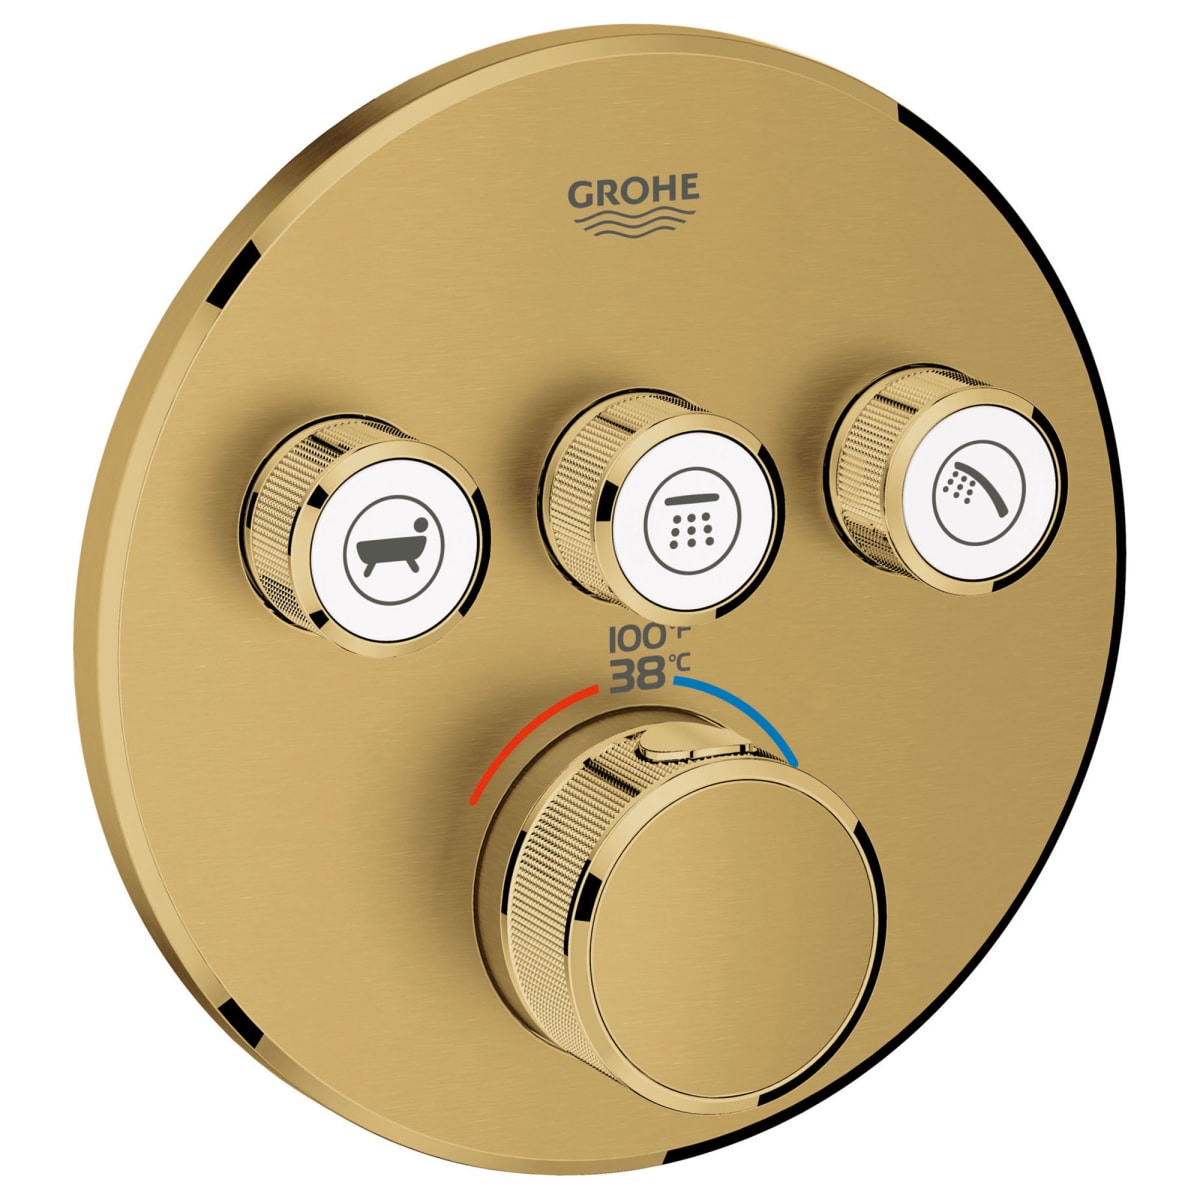 Grohe Grohtherm Function Thermostatic | Build.com